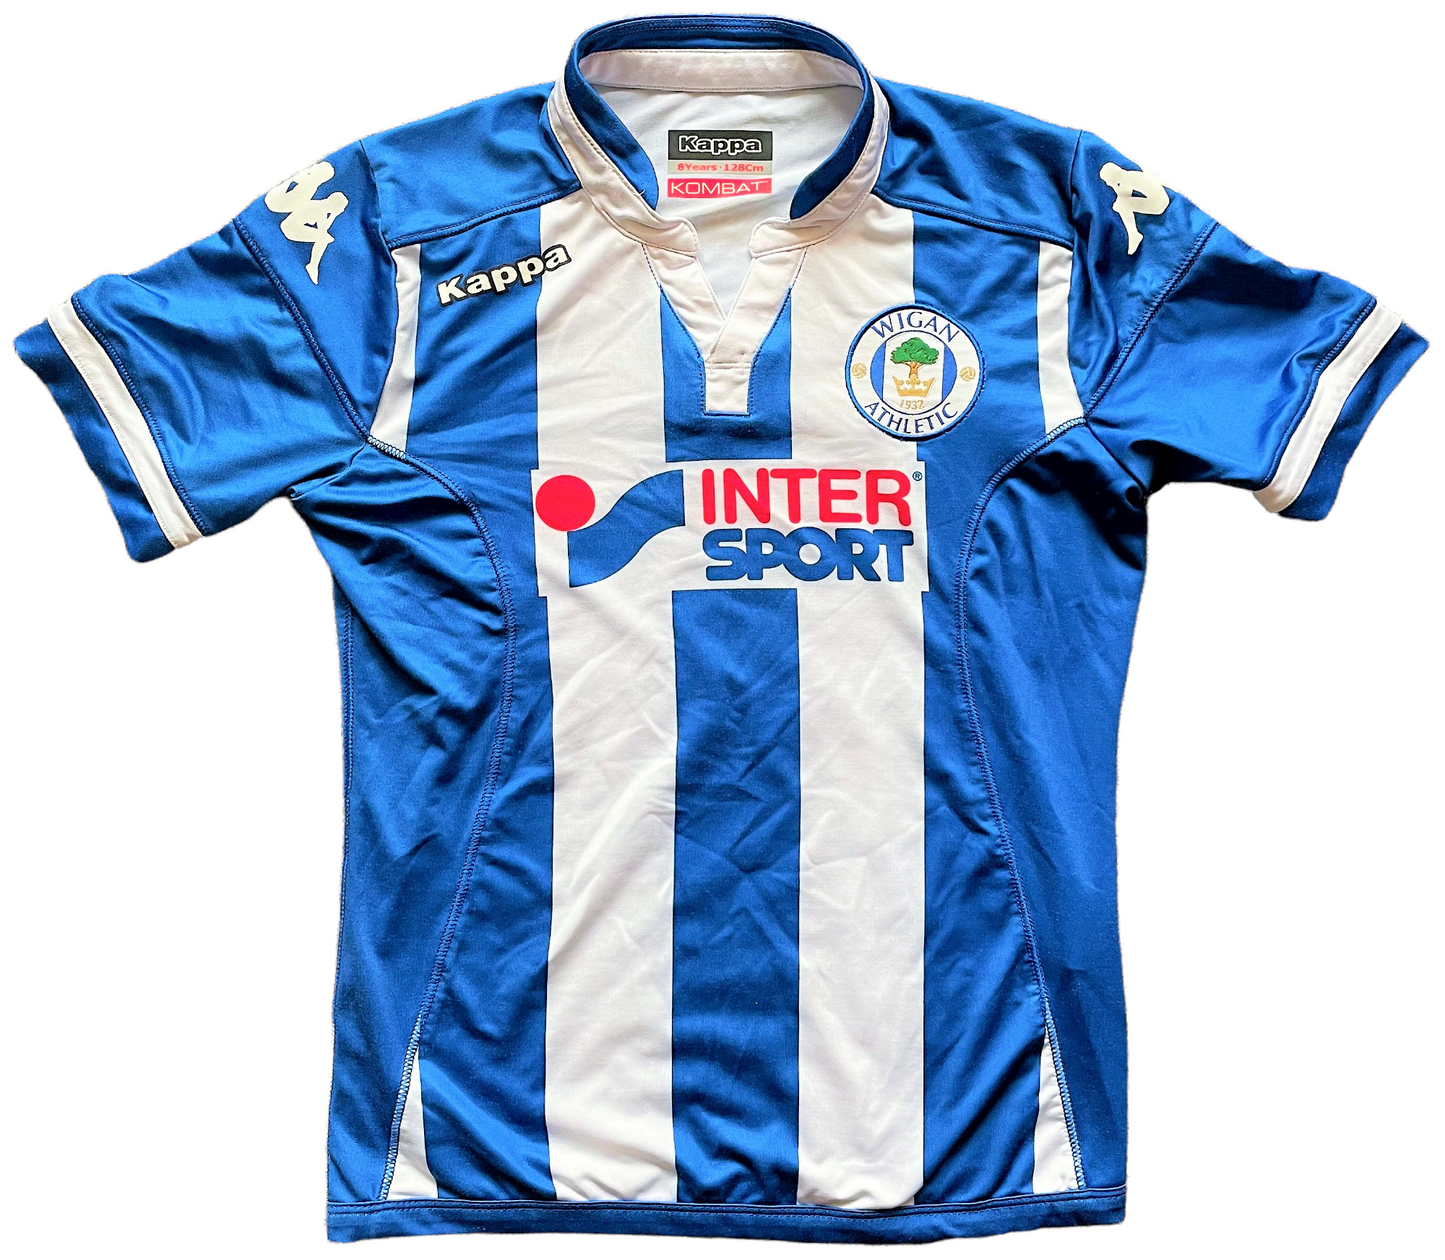 2015-16 Wigan Home Shirt (excellent) 8 years